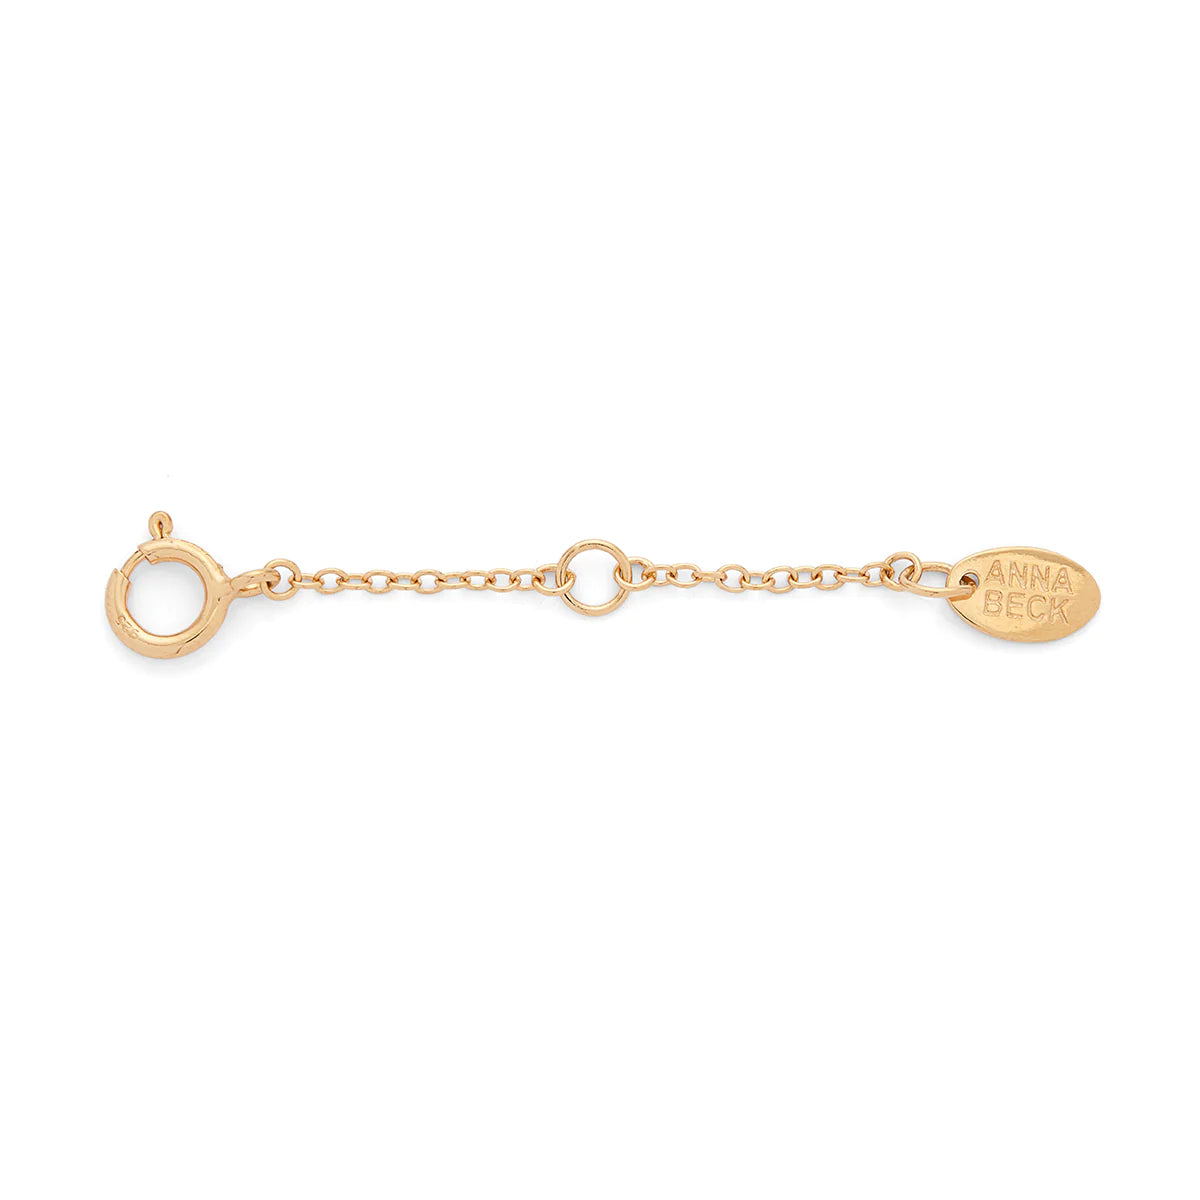 Delicate gold extender chain 2 inches